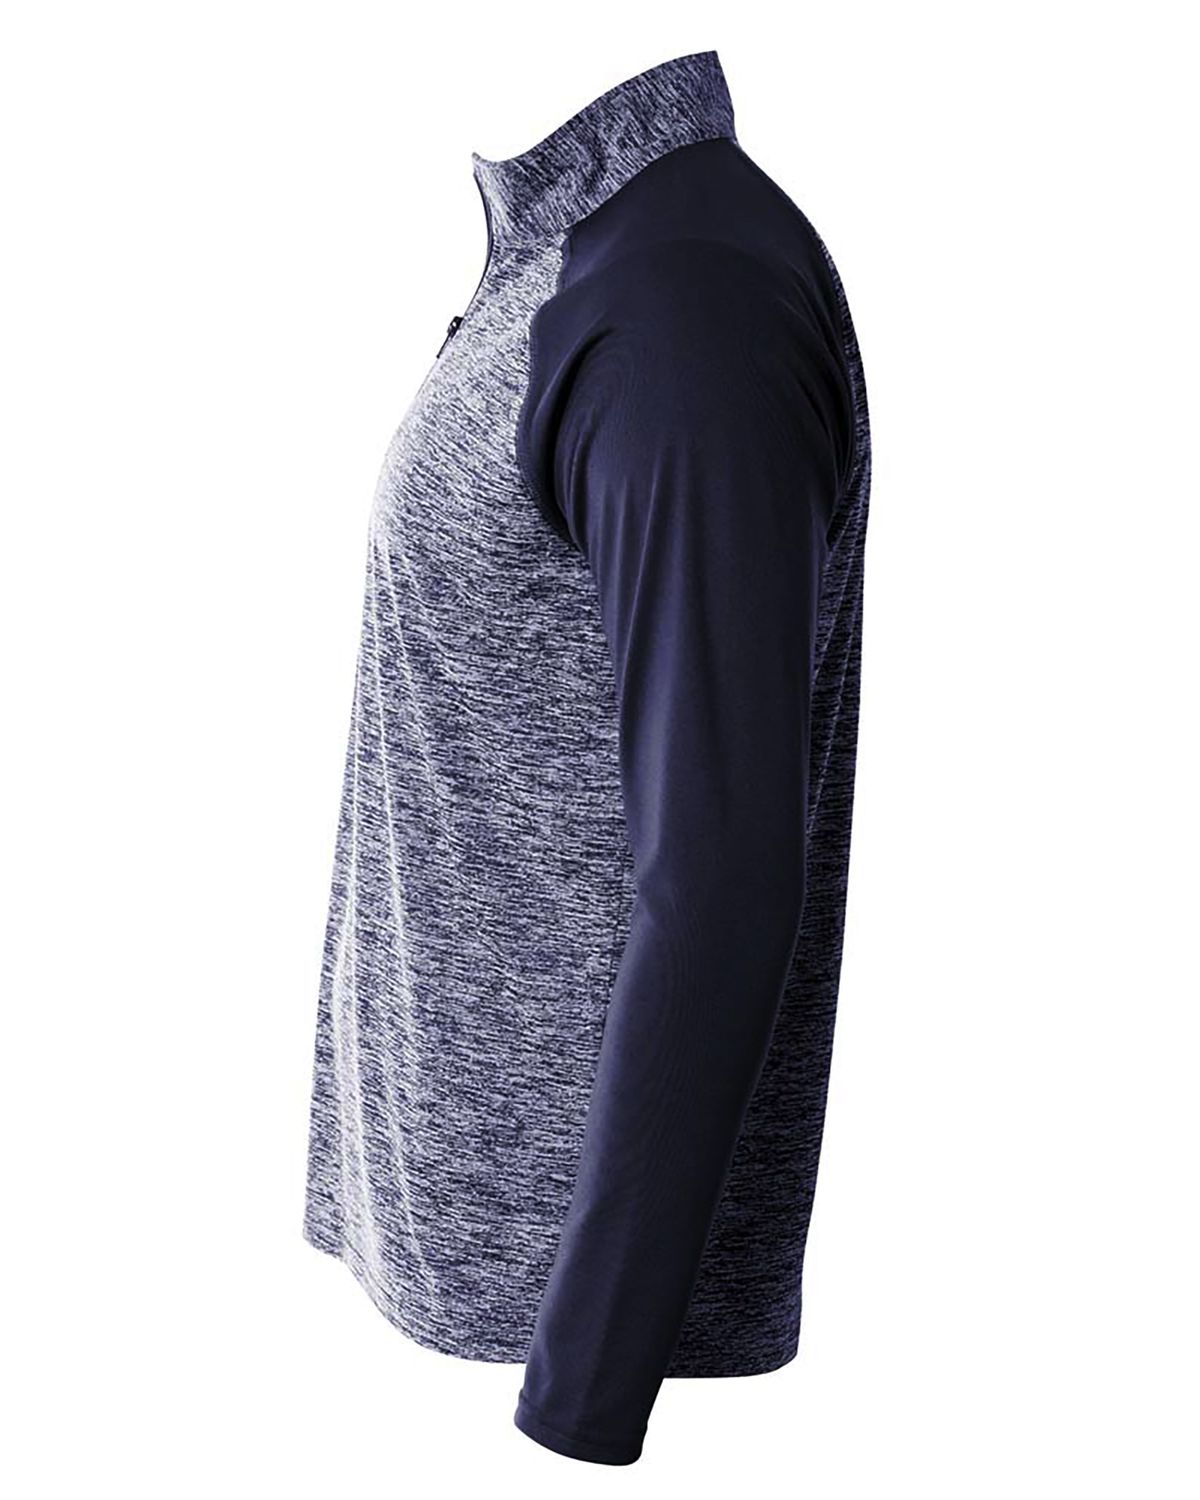 'A4 N4249 Adult Space-Dye 1/4 Zip with Contrast Sleeve'